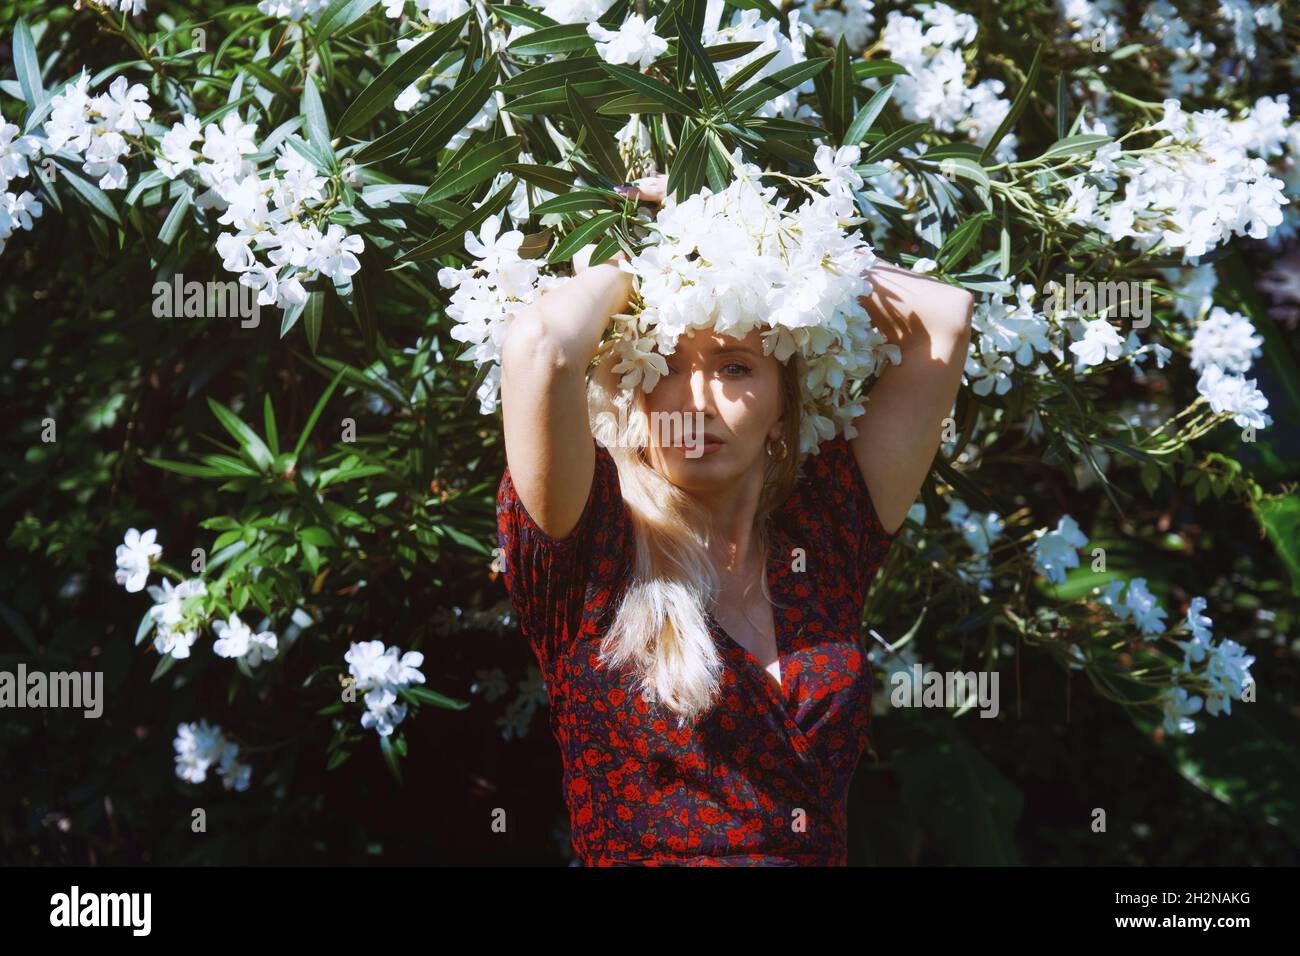 Blond woman holding flower branch on head at garden Stock Photo